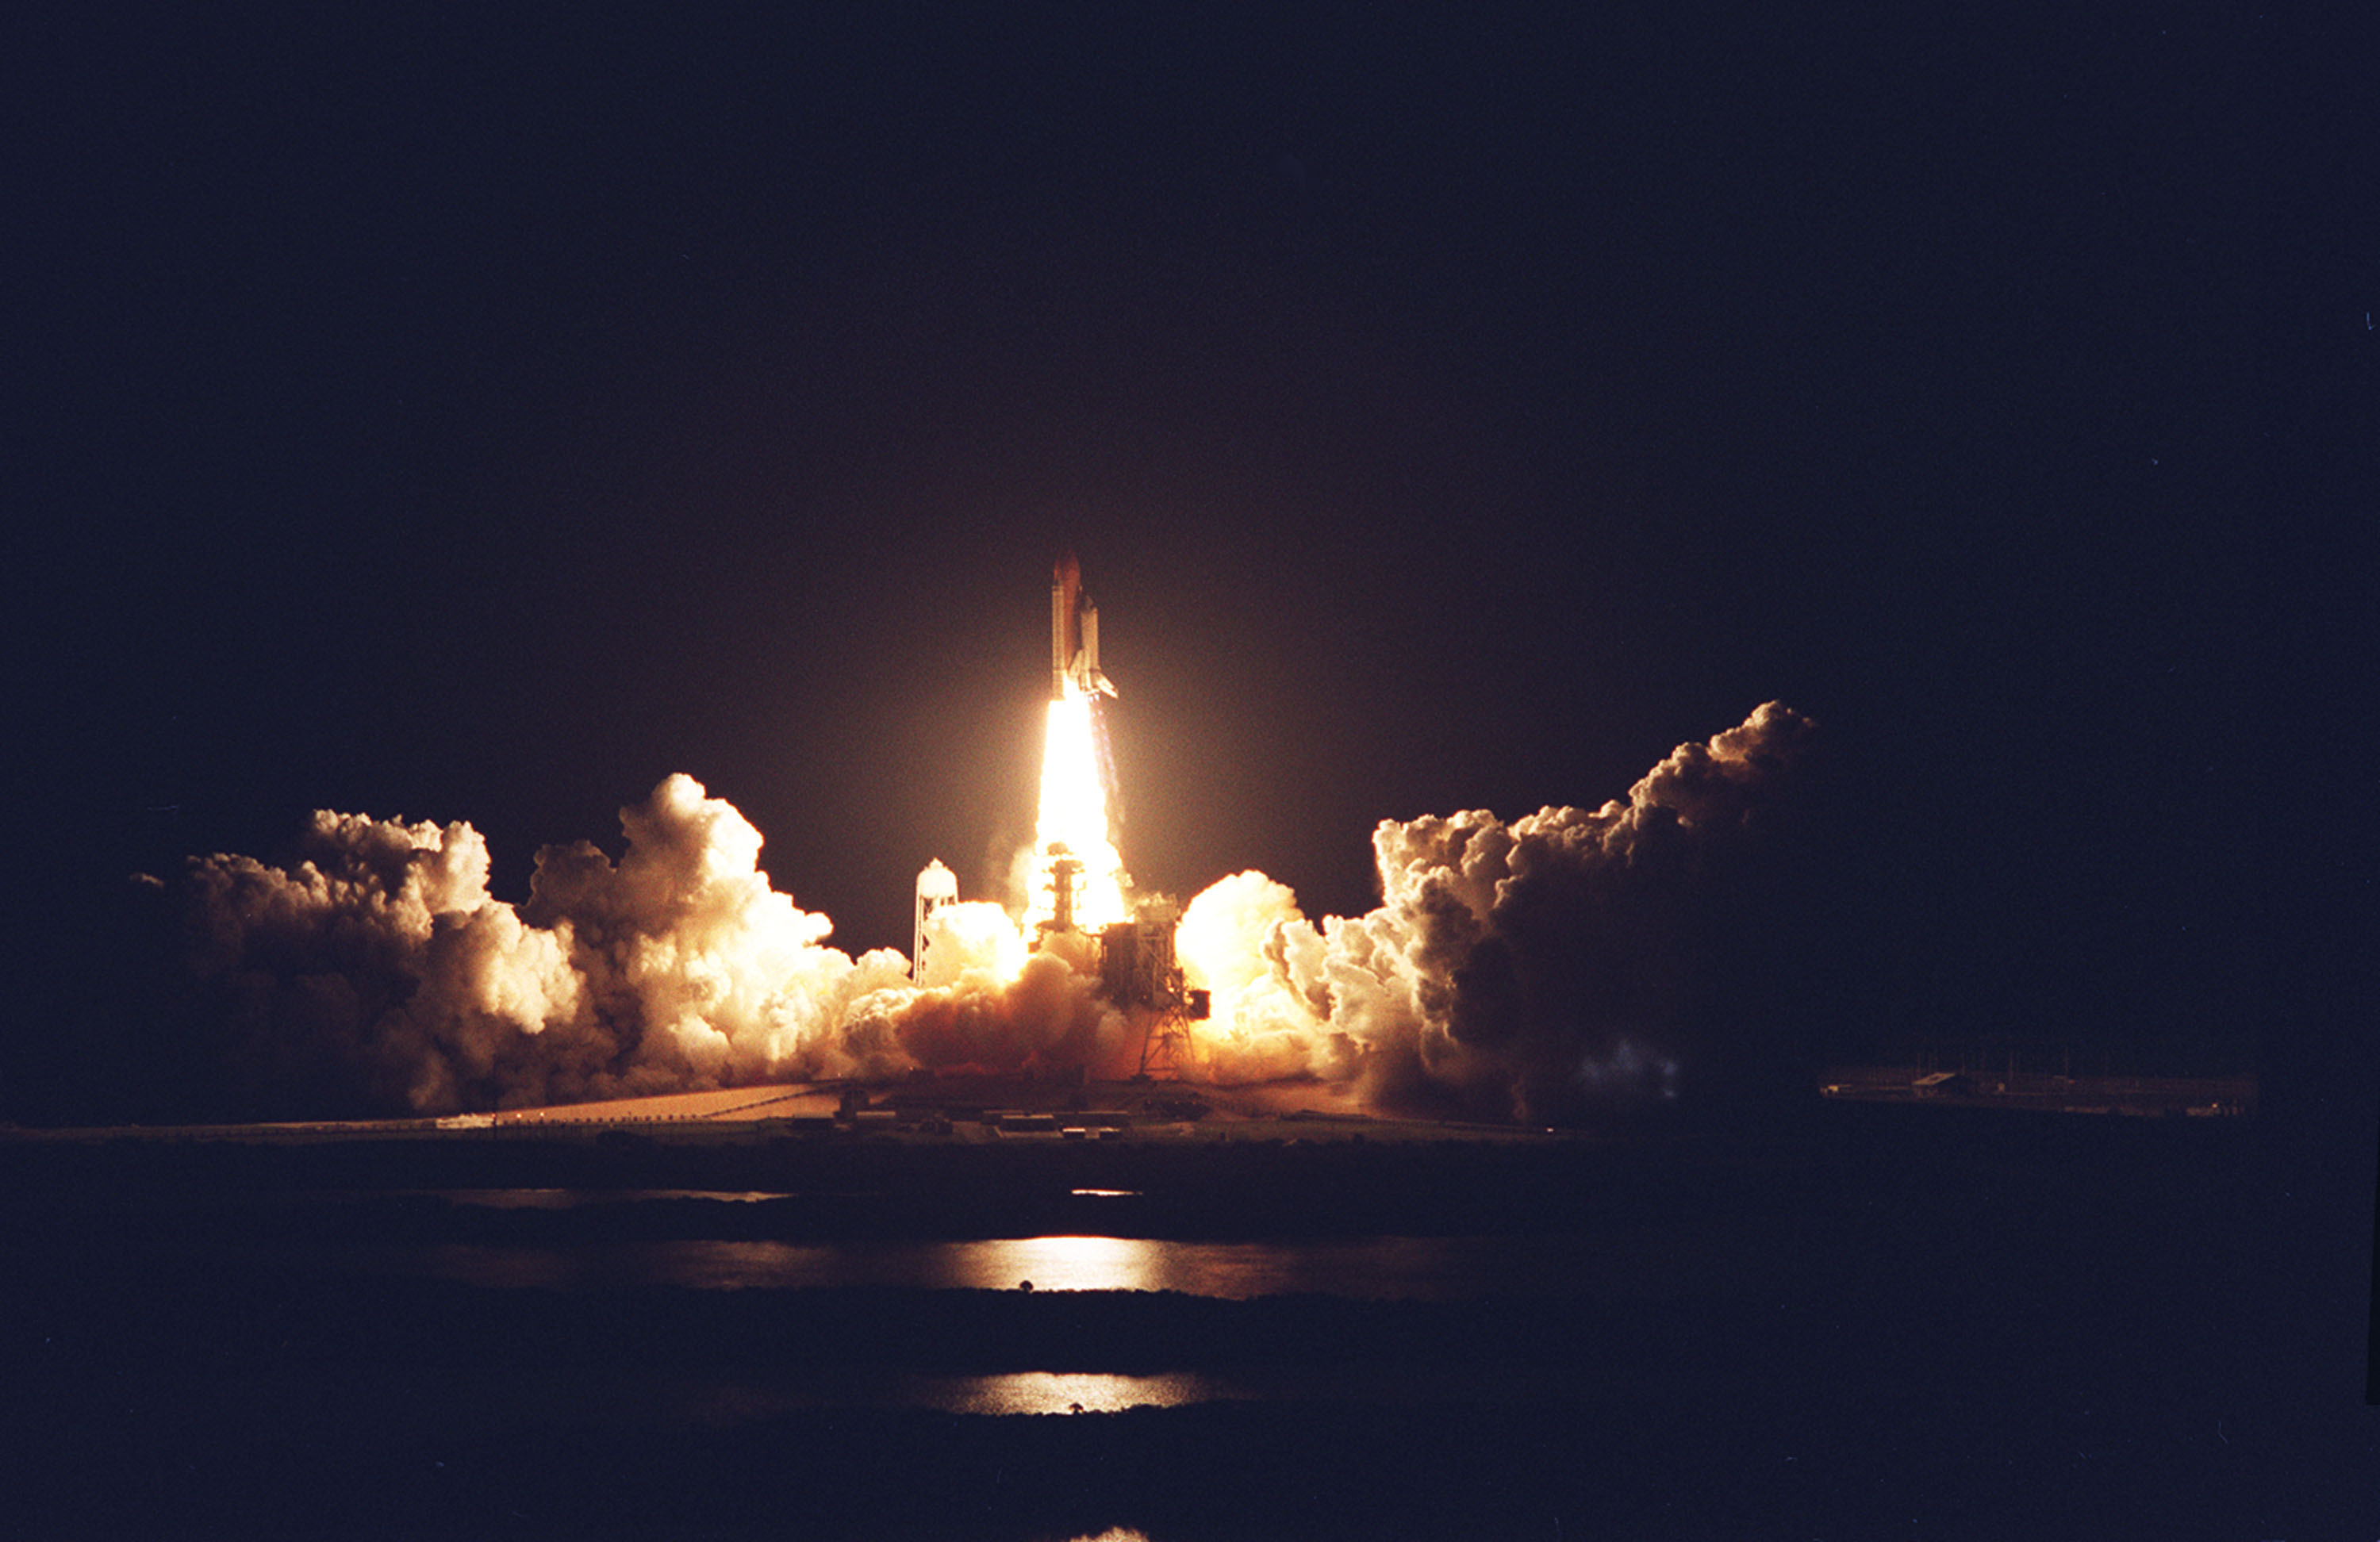 The space shuttle Columbia lifts off into a dark sky, illuminated by the flame pouring from its engine, which reflects as well off the clouds of billowing smoke surrounding it.